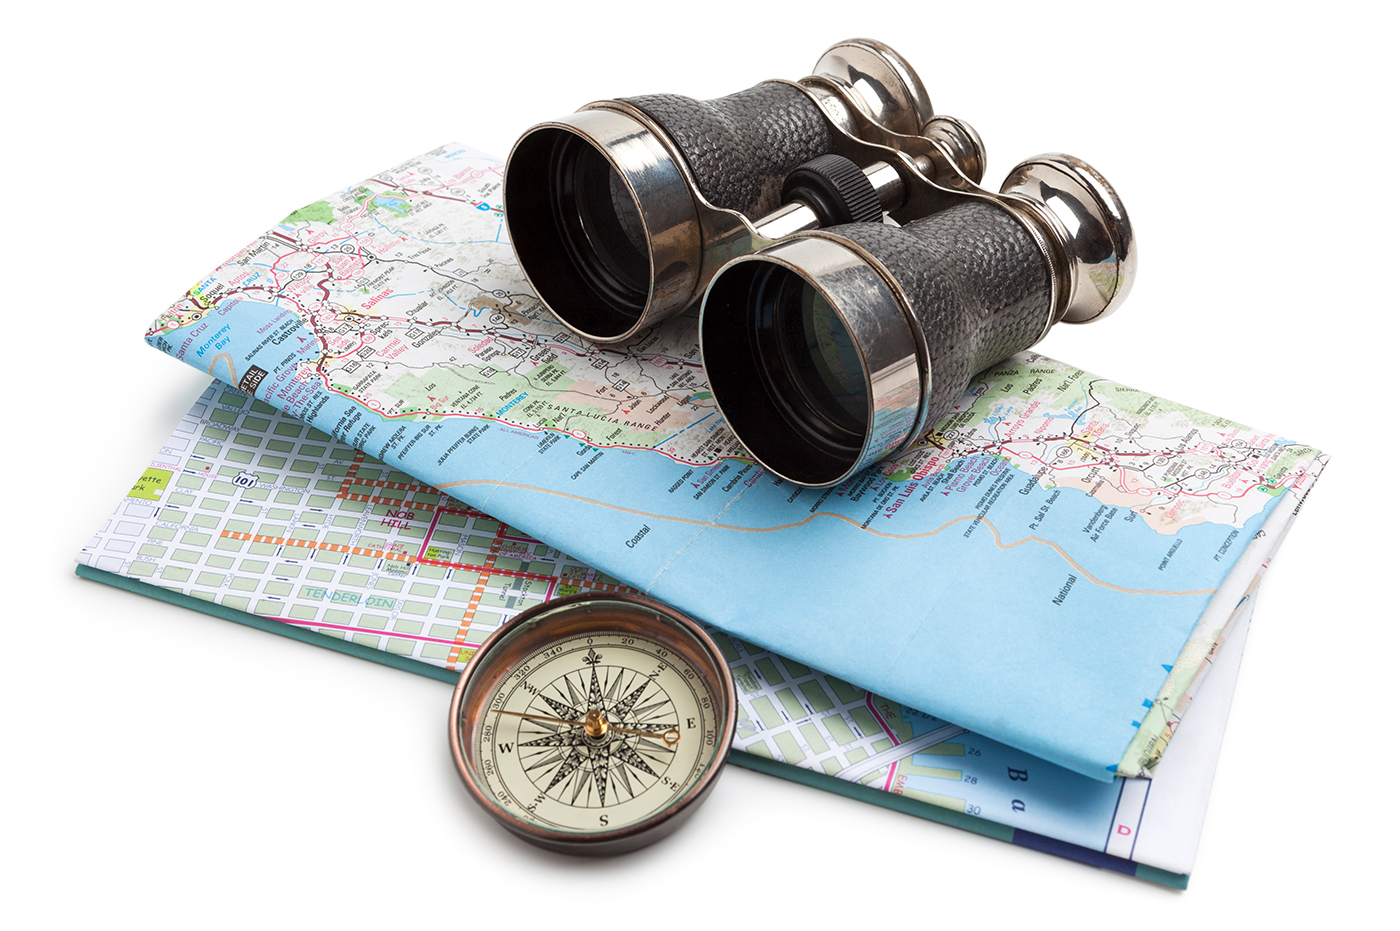 Maps, compass, and binoculars stacked together.